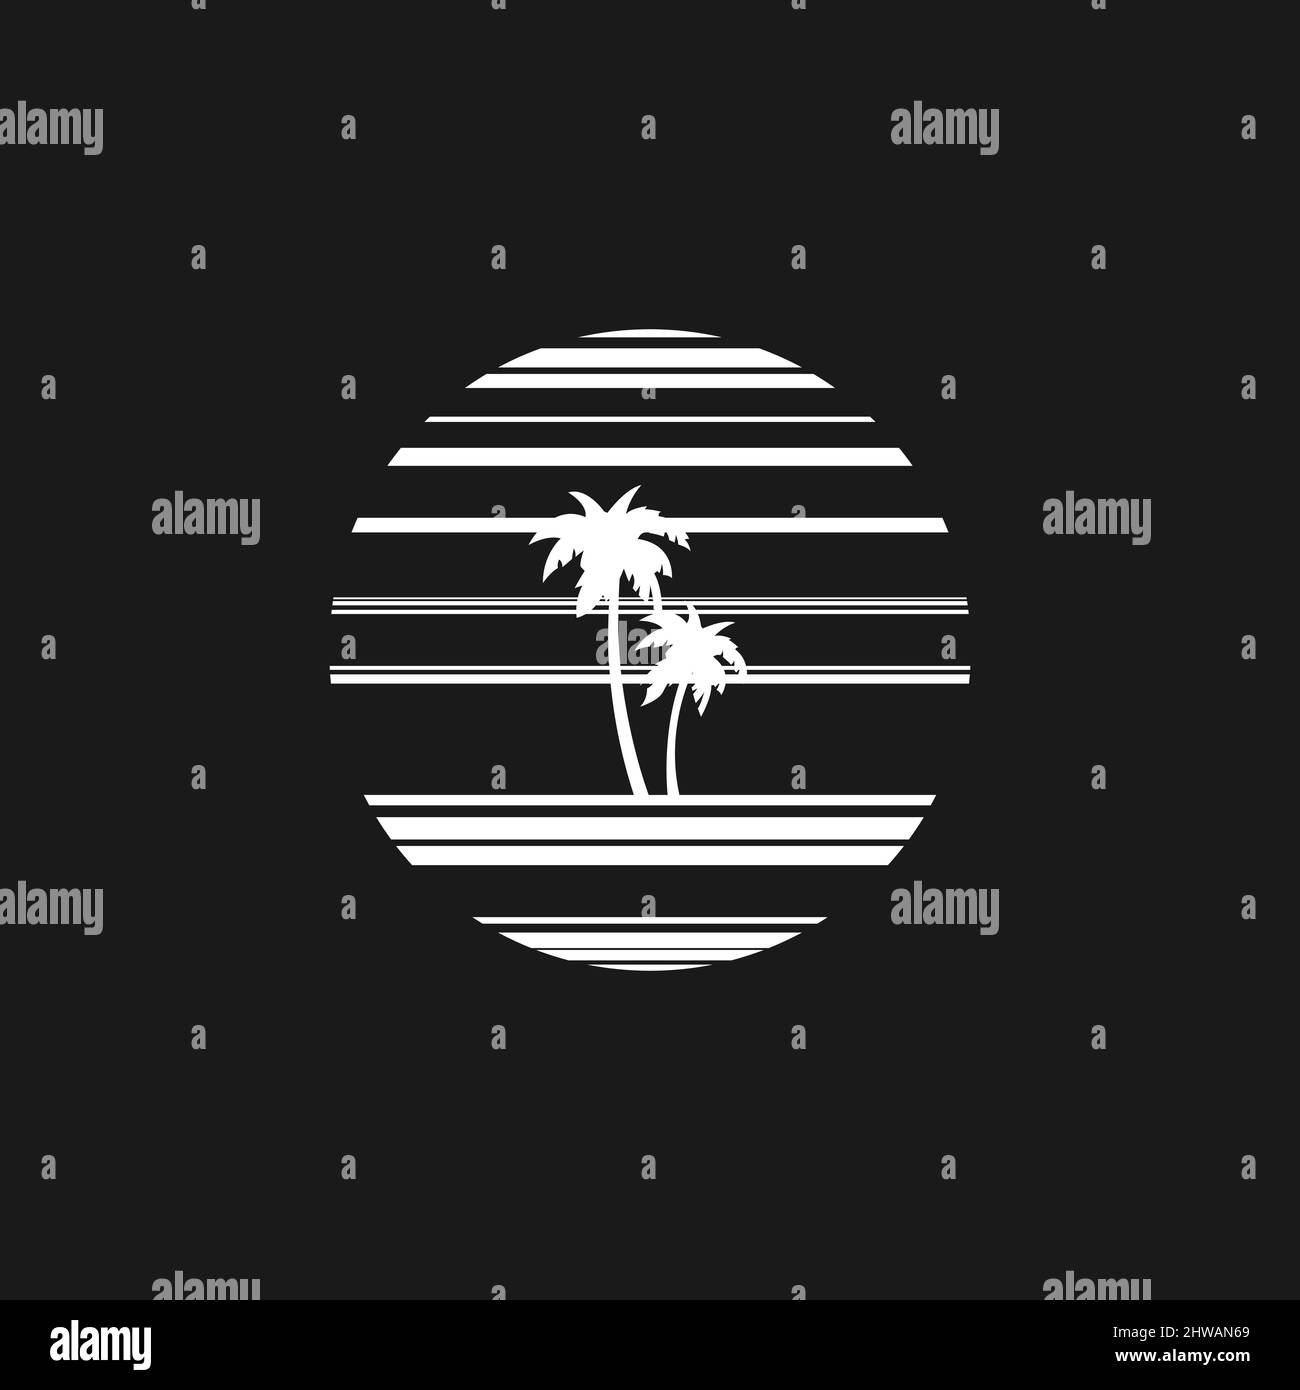 Retrowave sun 1980s style with the palm tree silhouette. Black and white striped sun with palm tree silhouettes. Design element for retrowave style Stock Vector